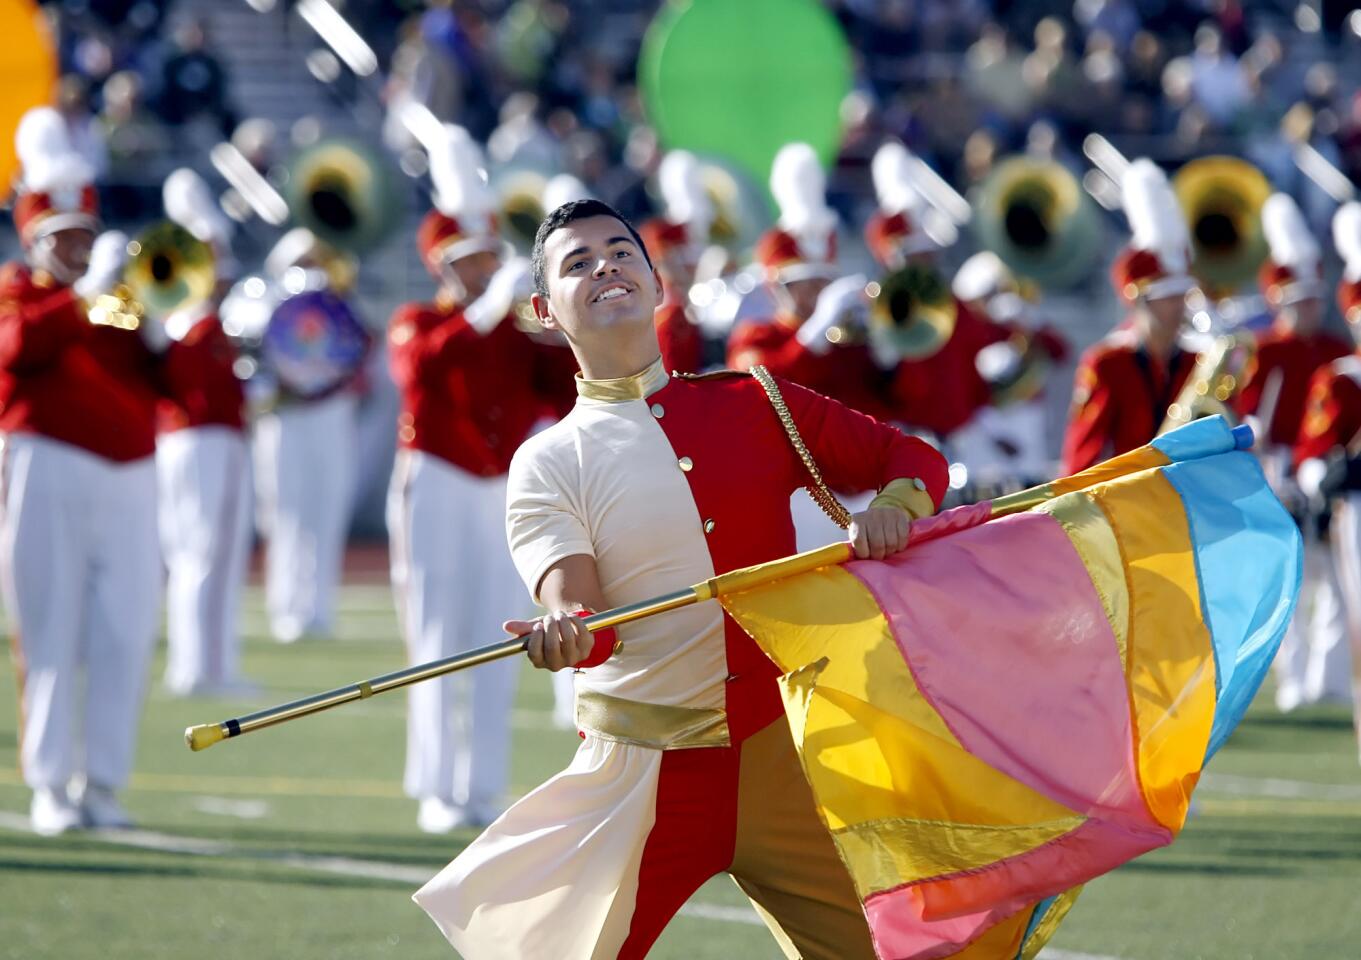 Pasadena City College Tournament of Roses Honor Band color guard member Andy de la Rosa, 21 of Compton, entertains the crowds gathered for Bandfest 2012 at Pasadena City College Robinson Stadium on Saturday, December 31, 2011. Seven bands from throughout the nation and the world participated in the morning festivities.